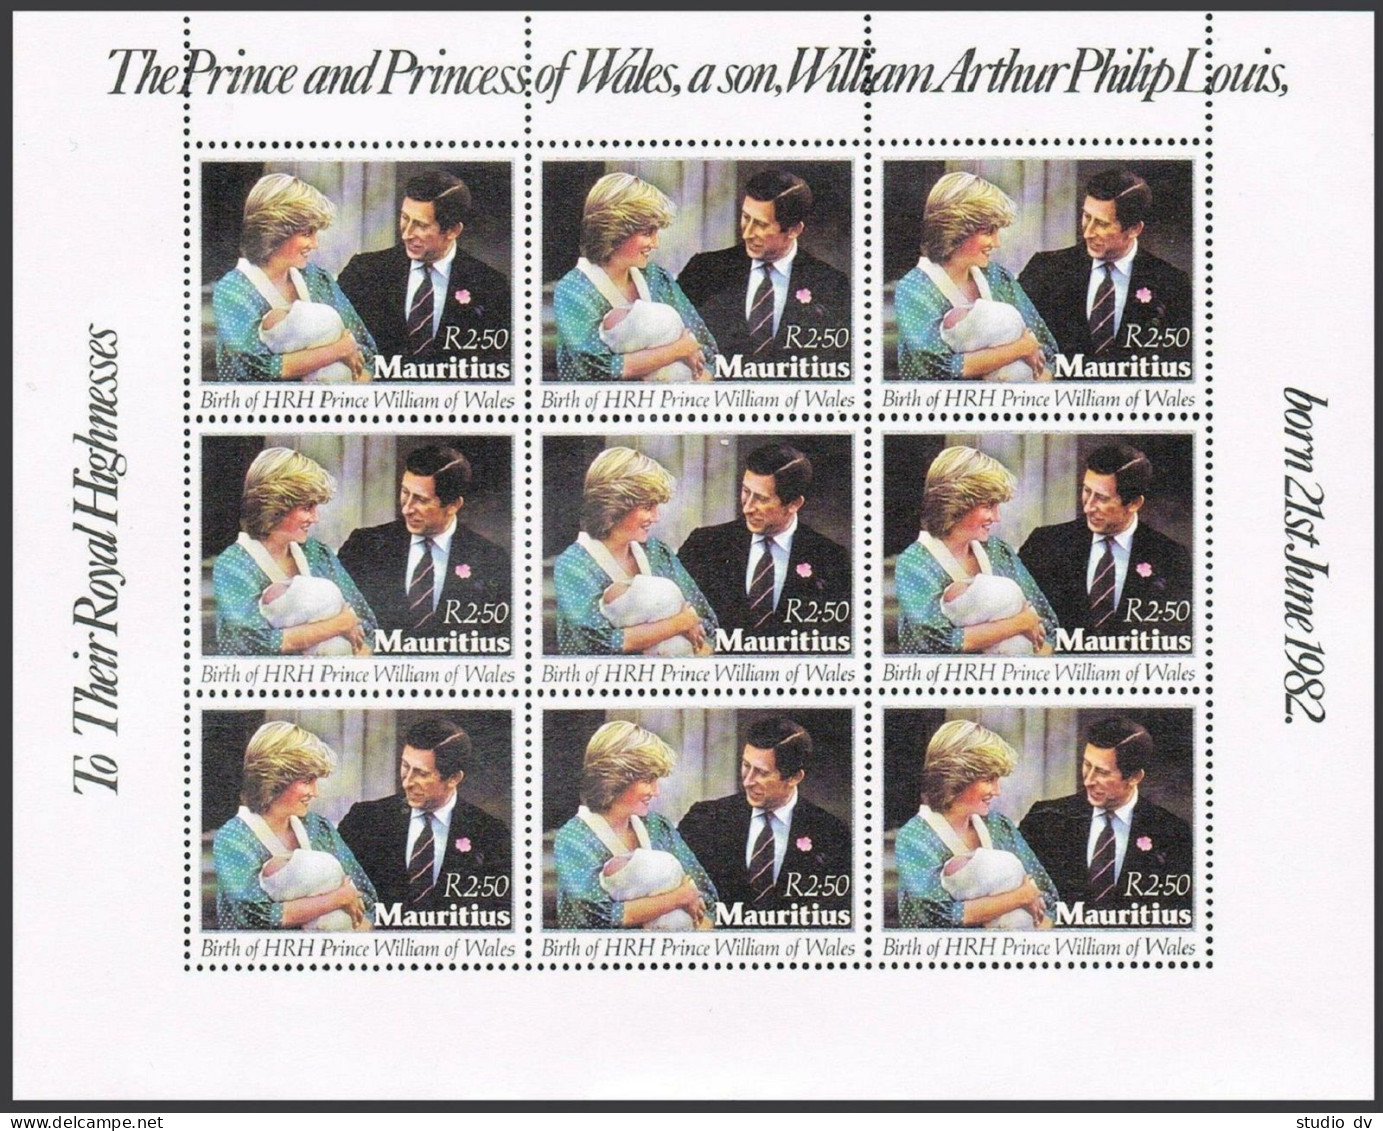 Mauritius 552 Sheet, MNH. Michel 548 Klb. Birth Of Prince William Of Wales,1982. - Maurice (1968-...)